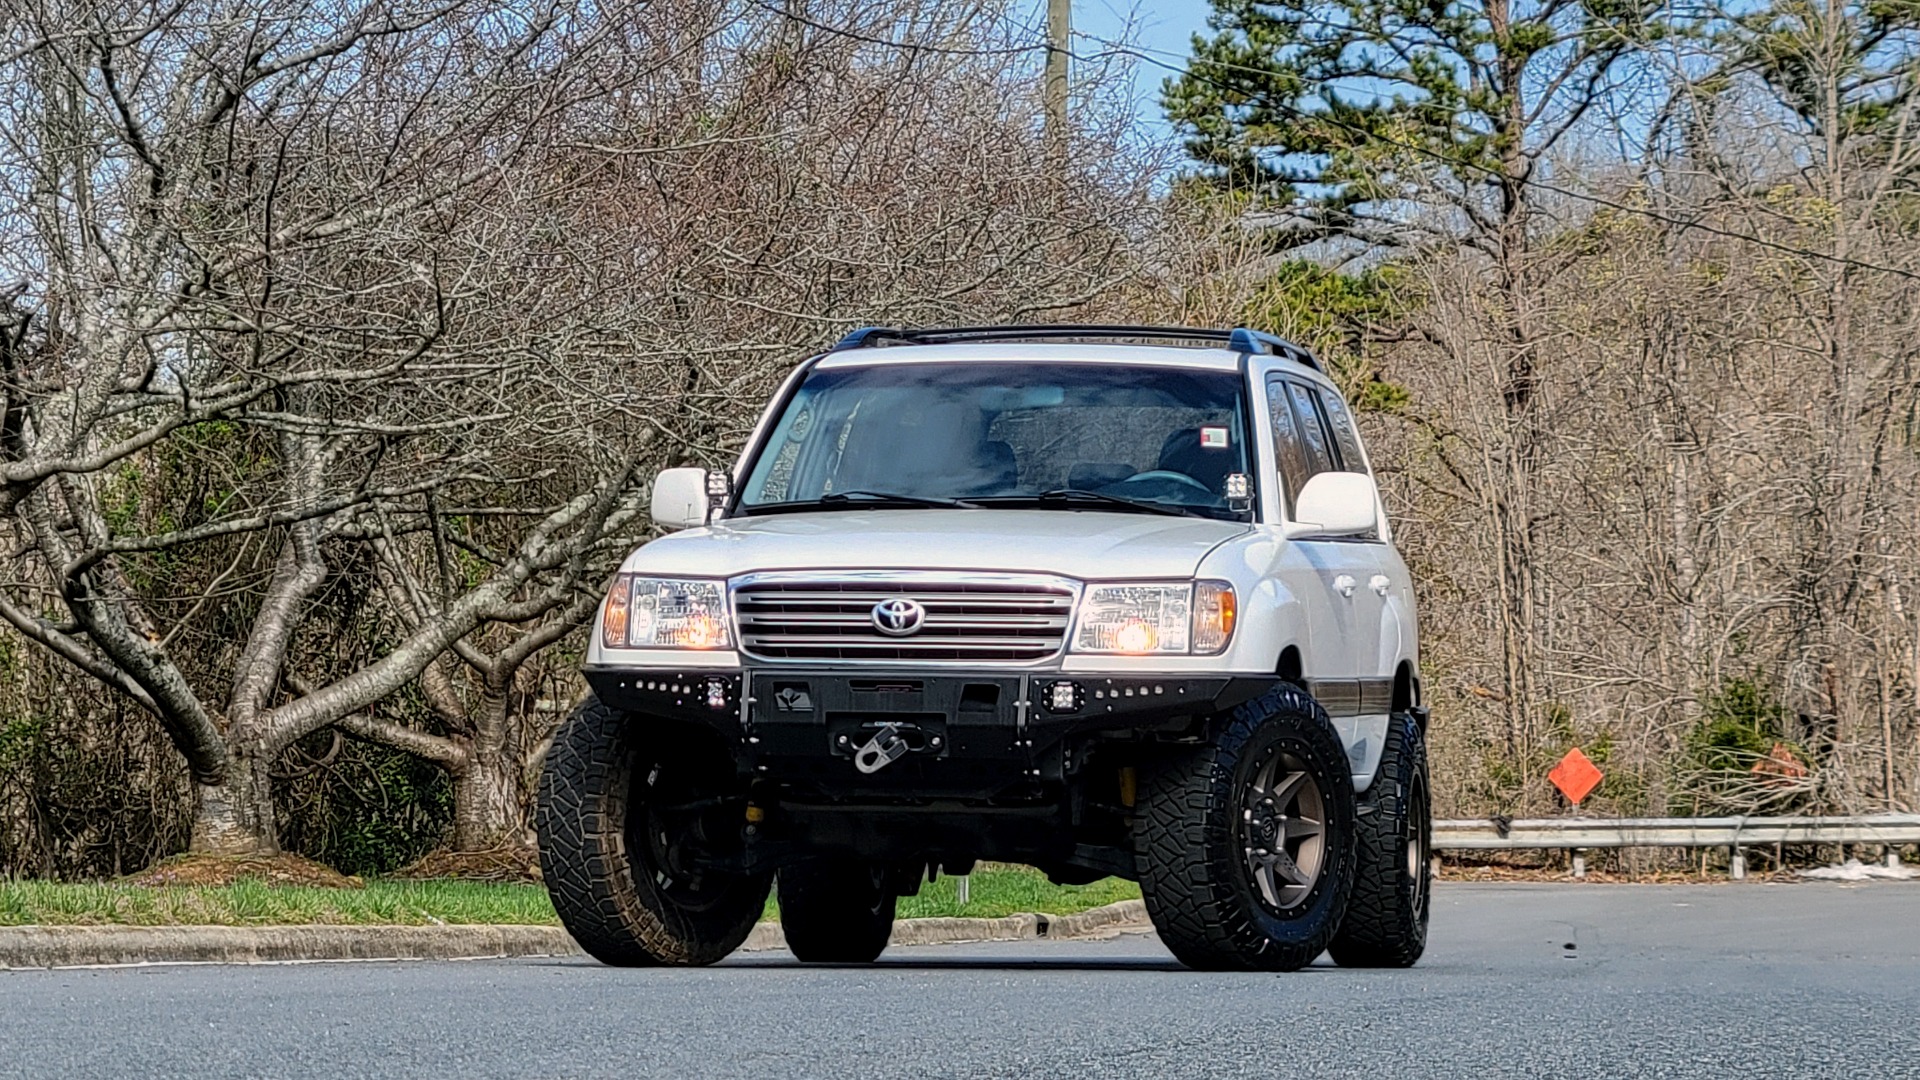 Used 2003 Toyota LAND CRUISER 4WD WAGON / 4.7L V8 / AUTO / NAVIGATION / LIFT / CUSTOM WHEELS for sale $27,999 at Formula Imports in Charlotte NC 28227 93